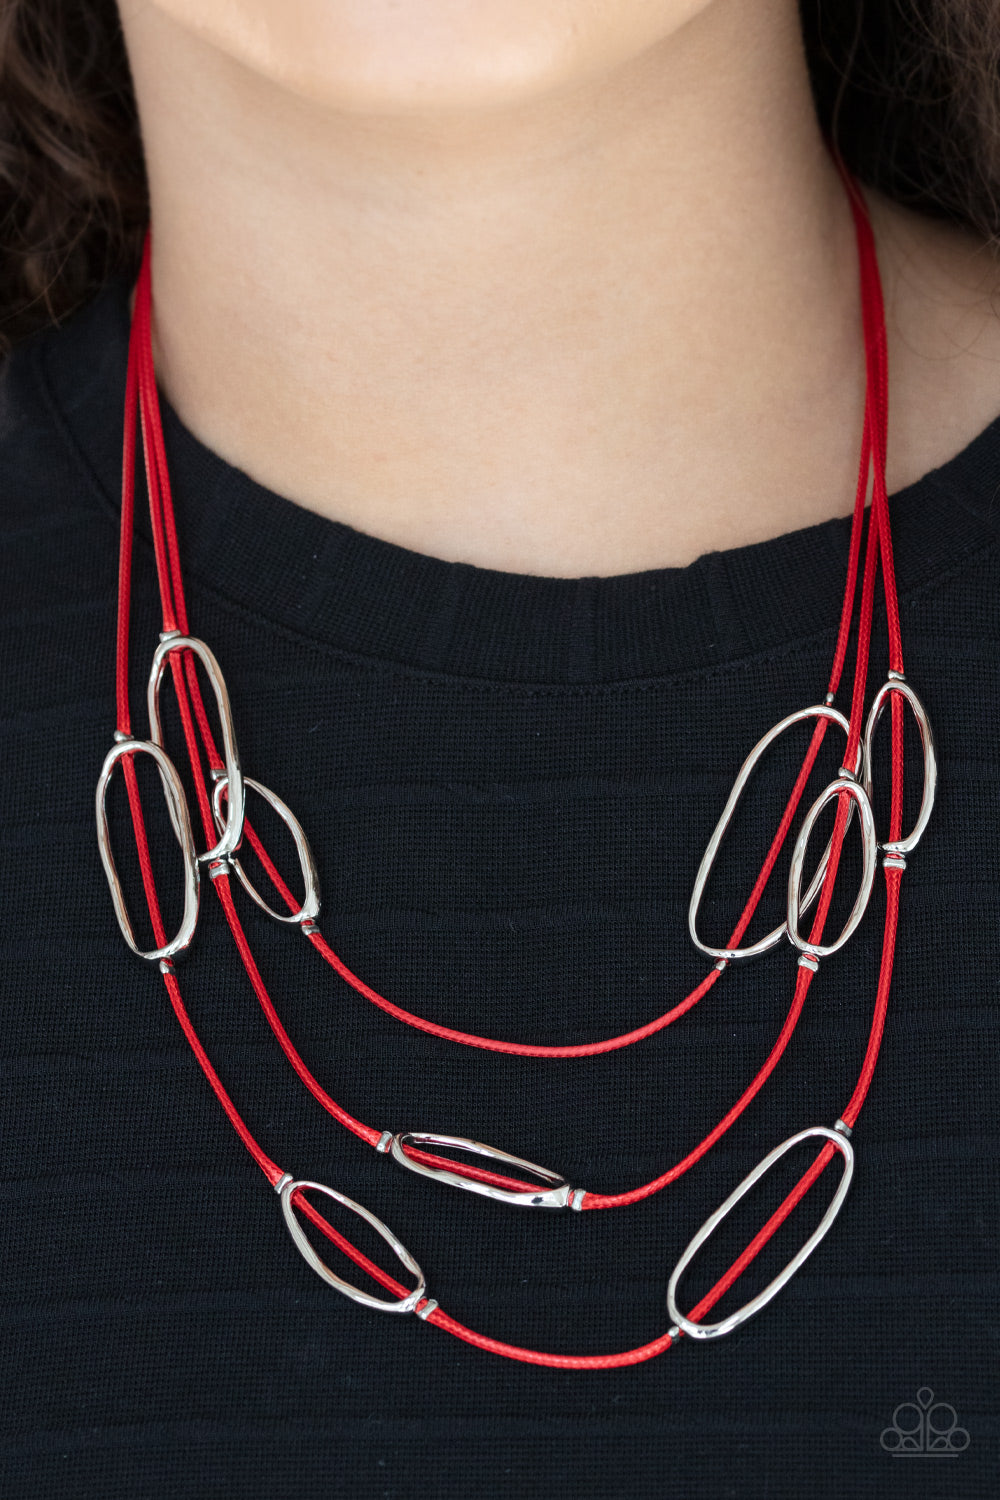 Paparazzi Necklaces - Check Your Cord-inates - Red